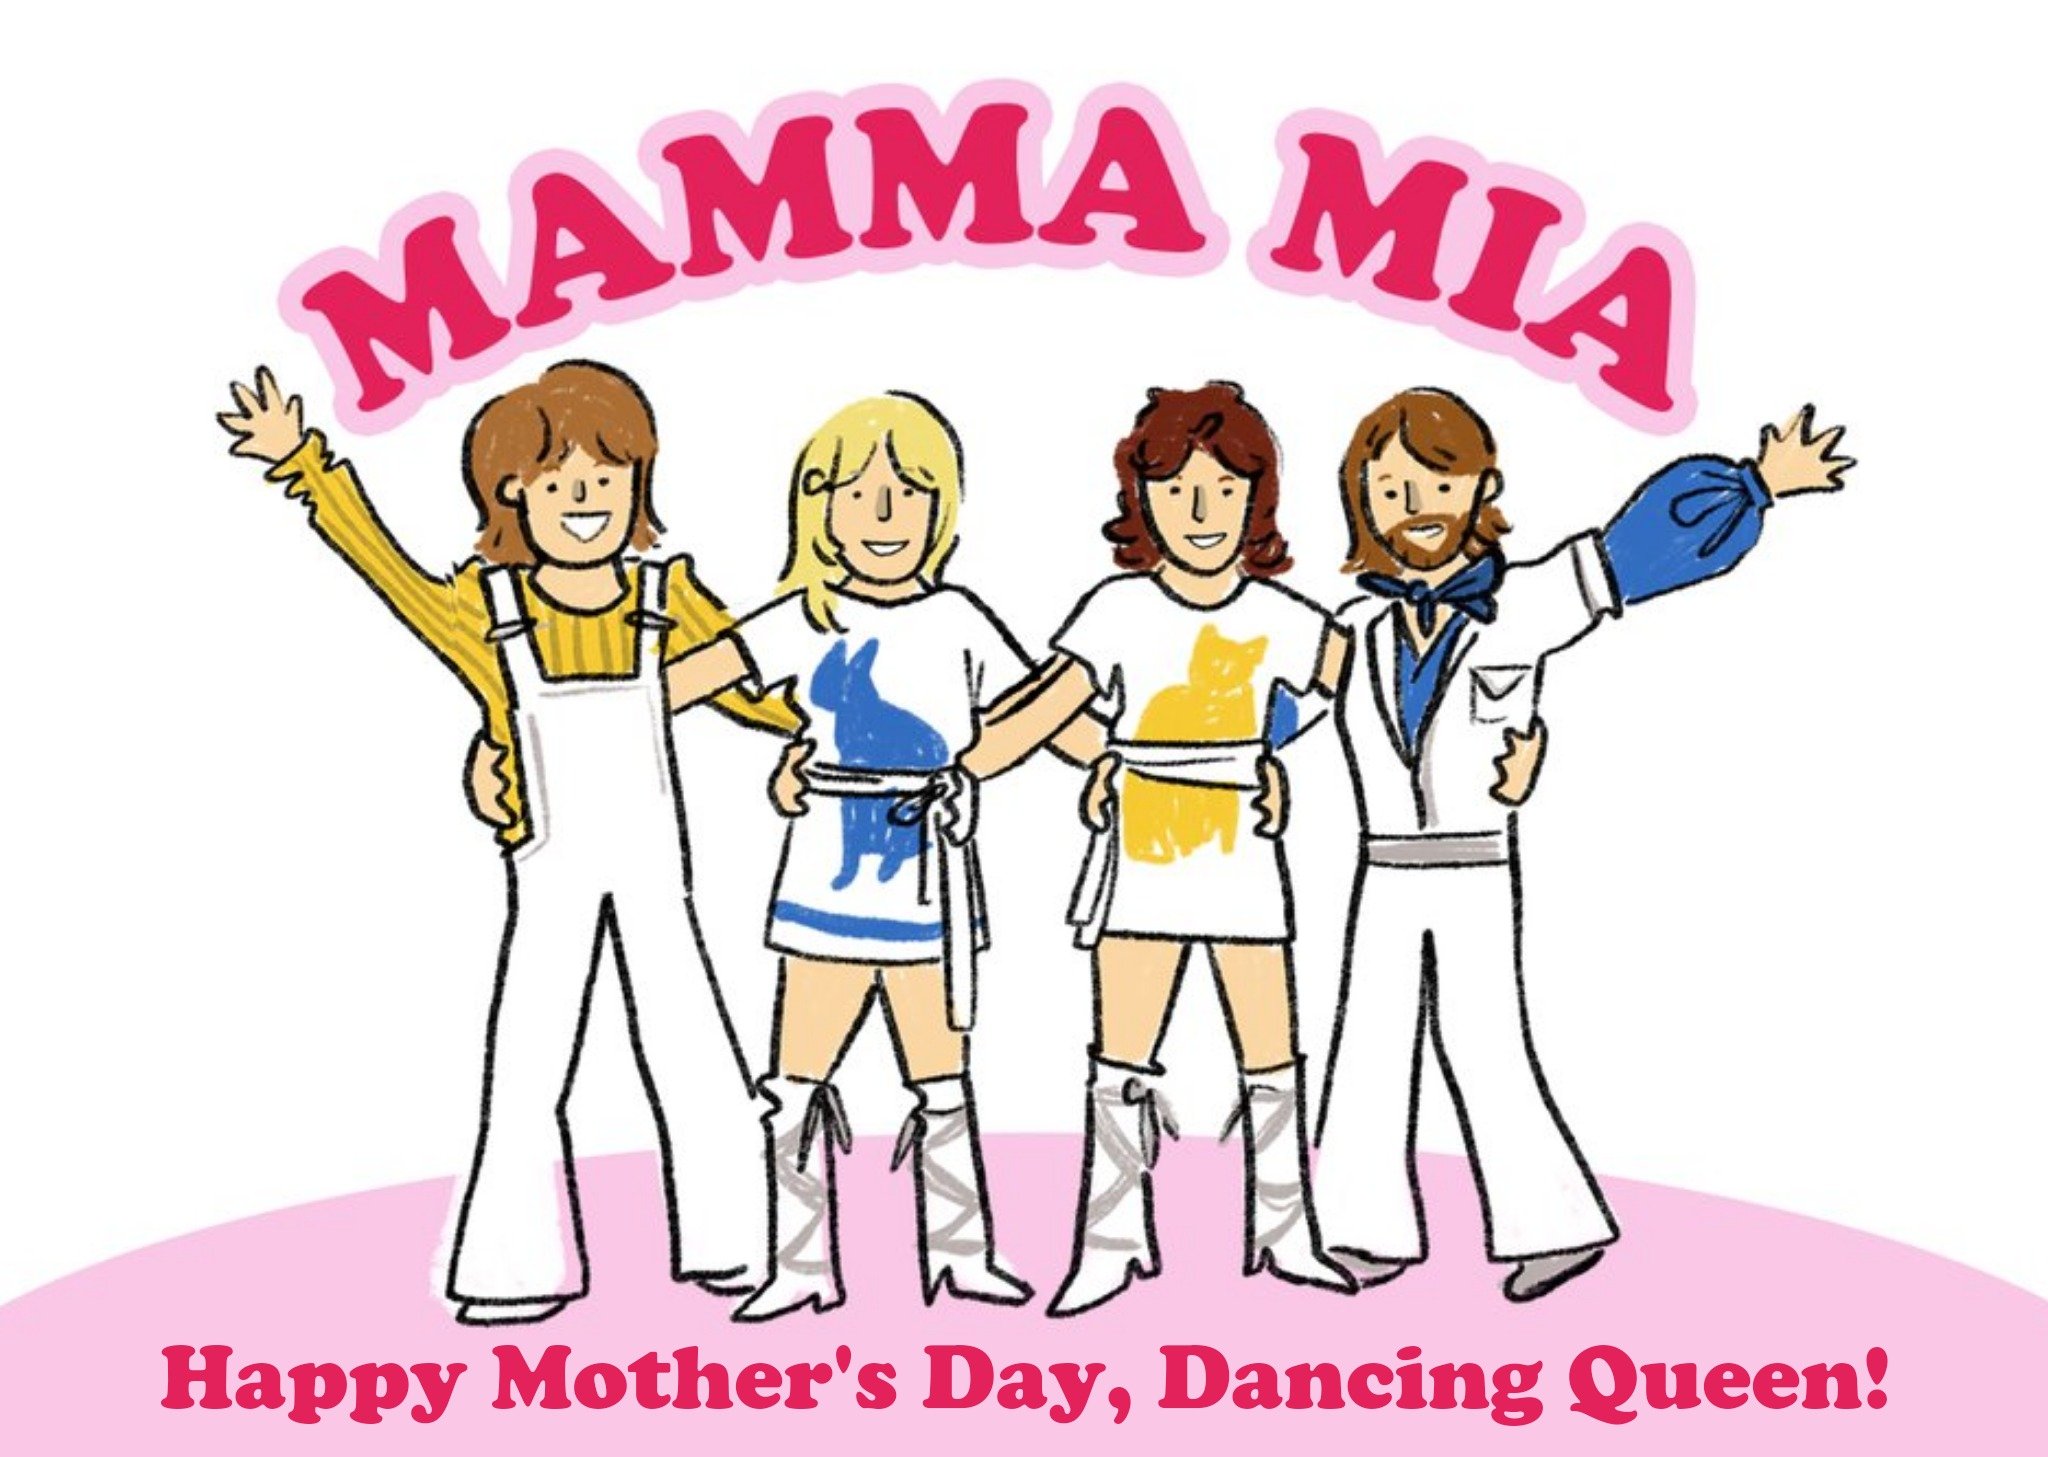 Mamma Mia Abba Dancing Queen Mother's Day Card, Large